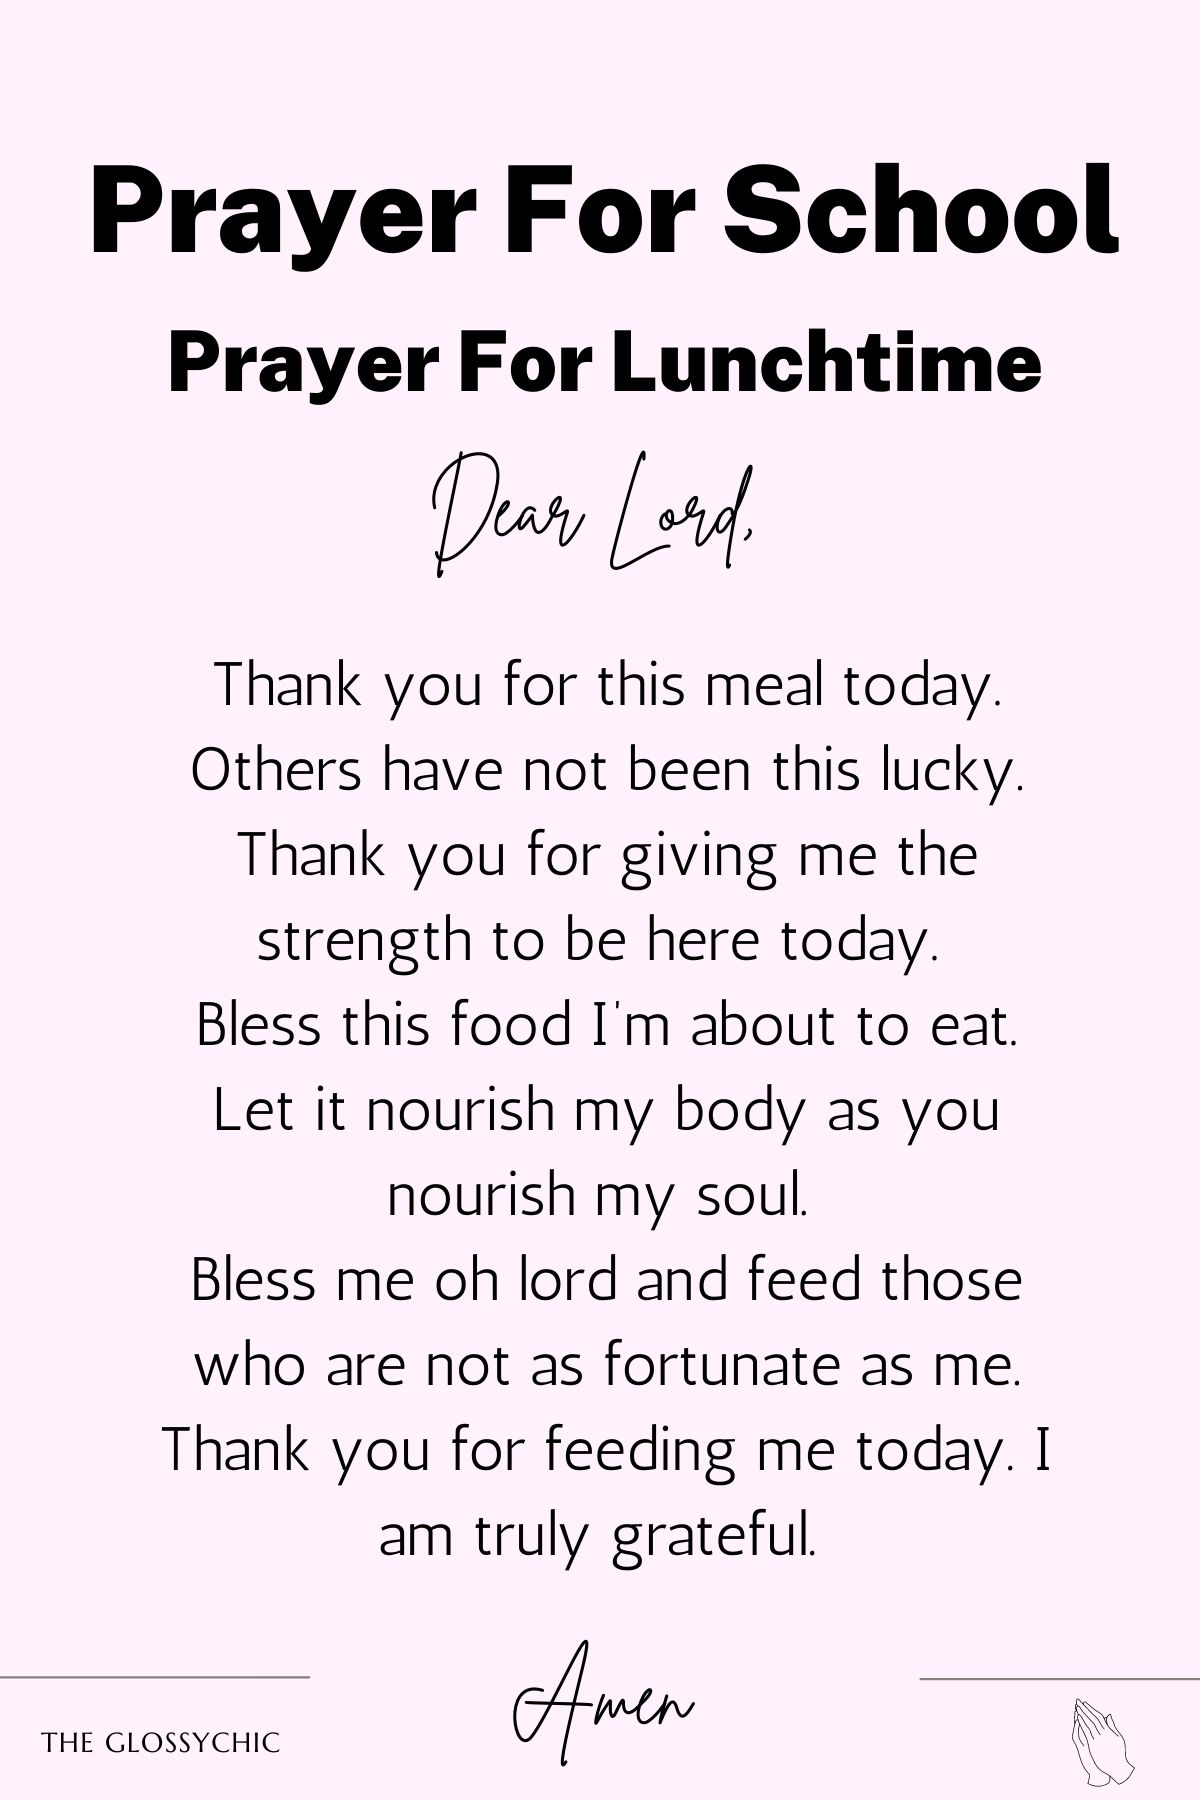 Prayer for lunchtime